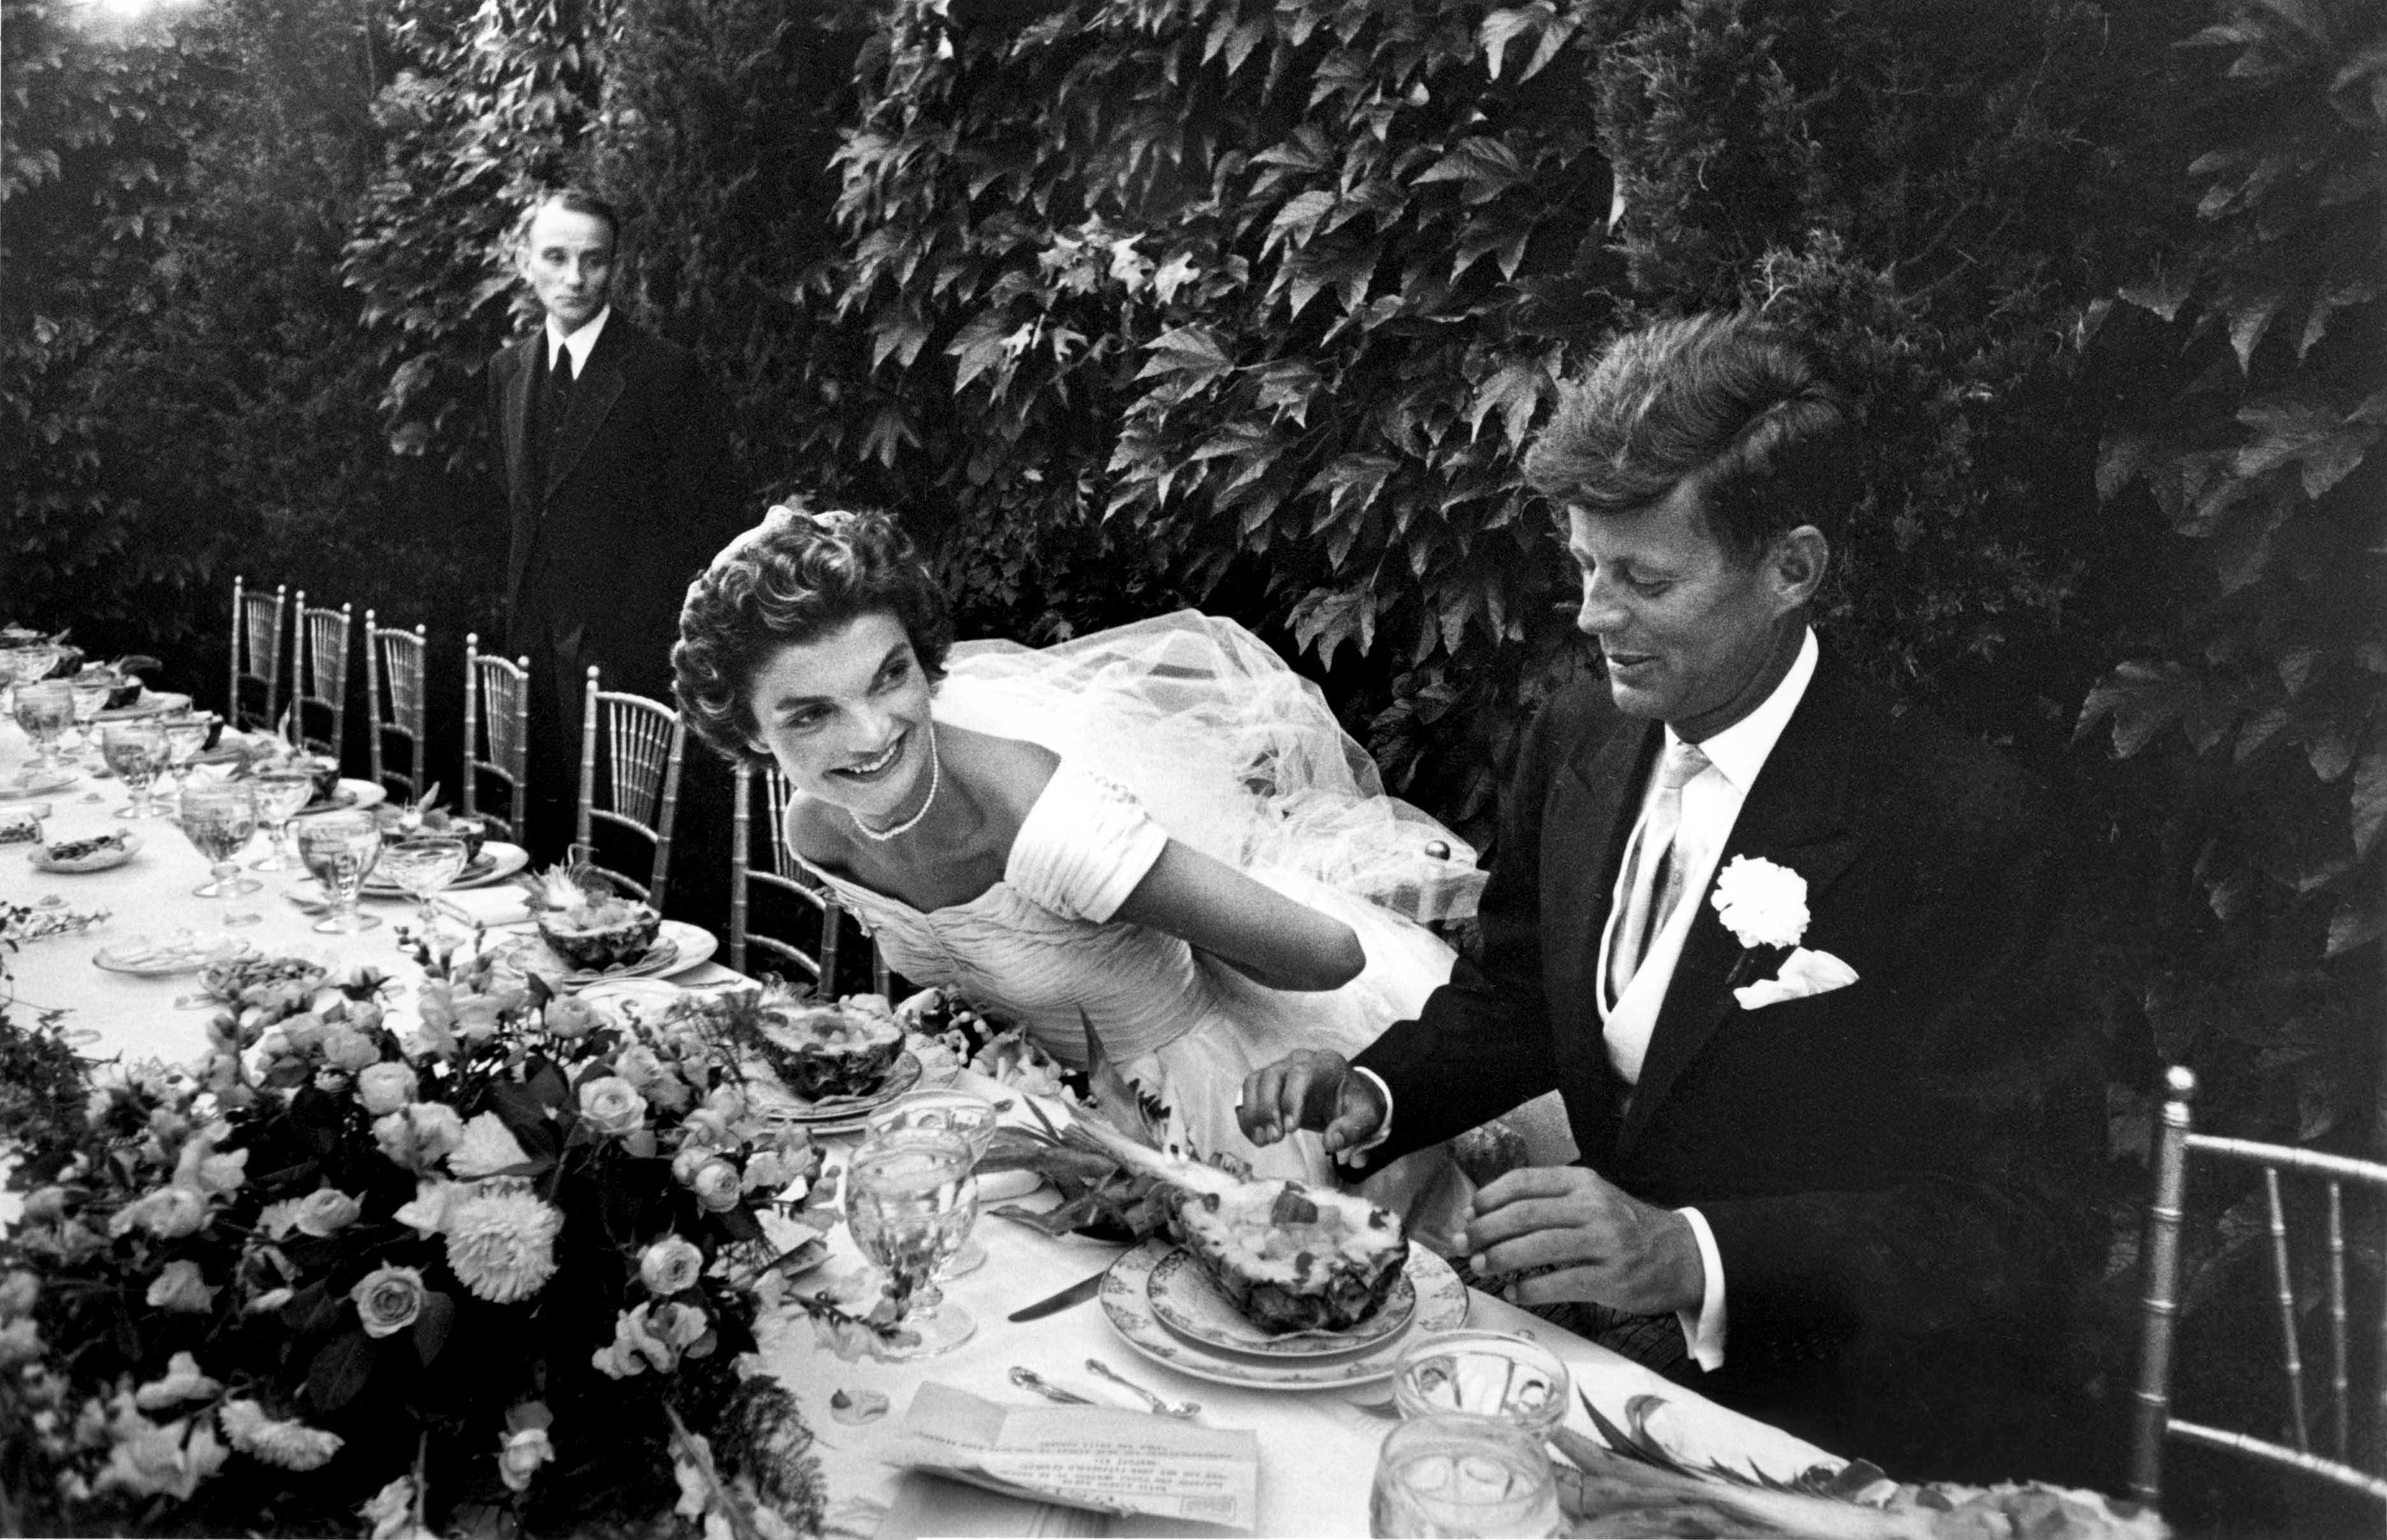 Jackie and John F. Kennedy at their wedding reception on September 12, 1953. | Source: Lisa Larson/Time Life Picture Collection/Getty Images